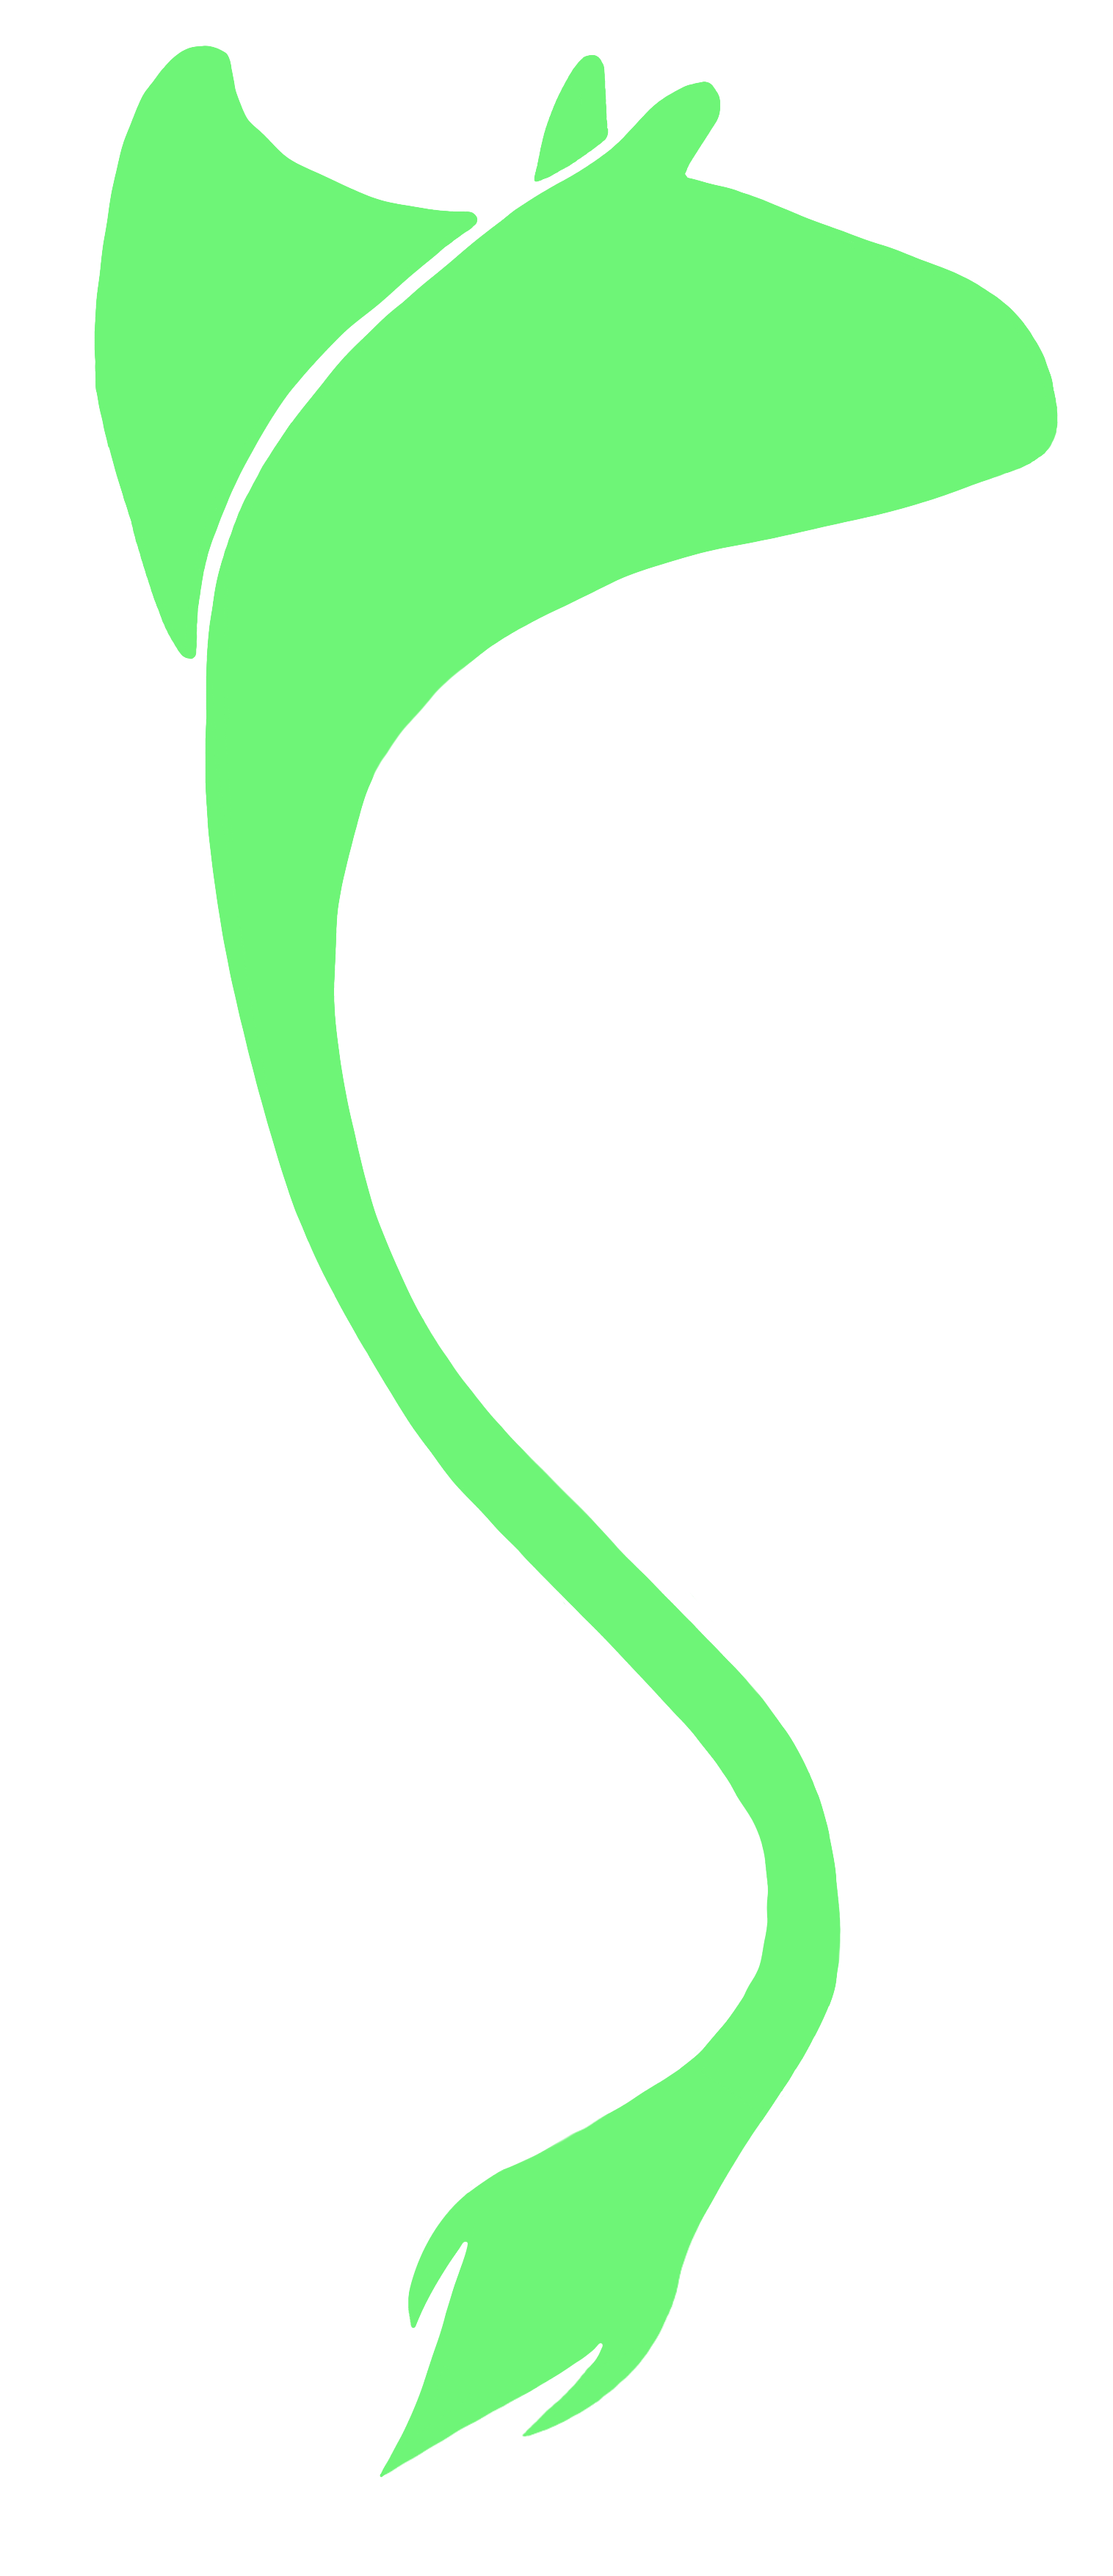 A manta ray silhouette painted in green.